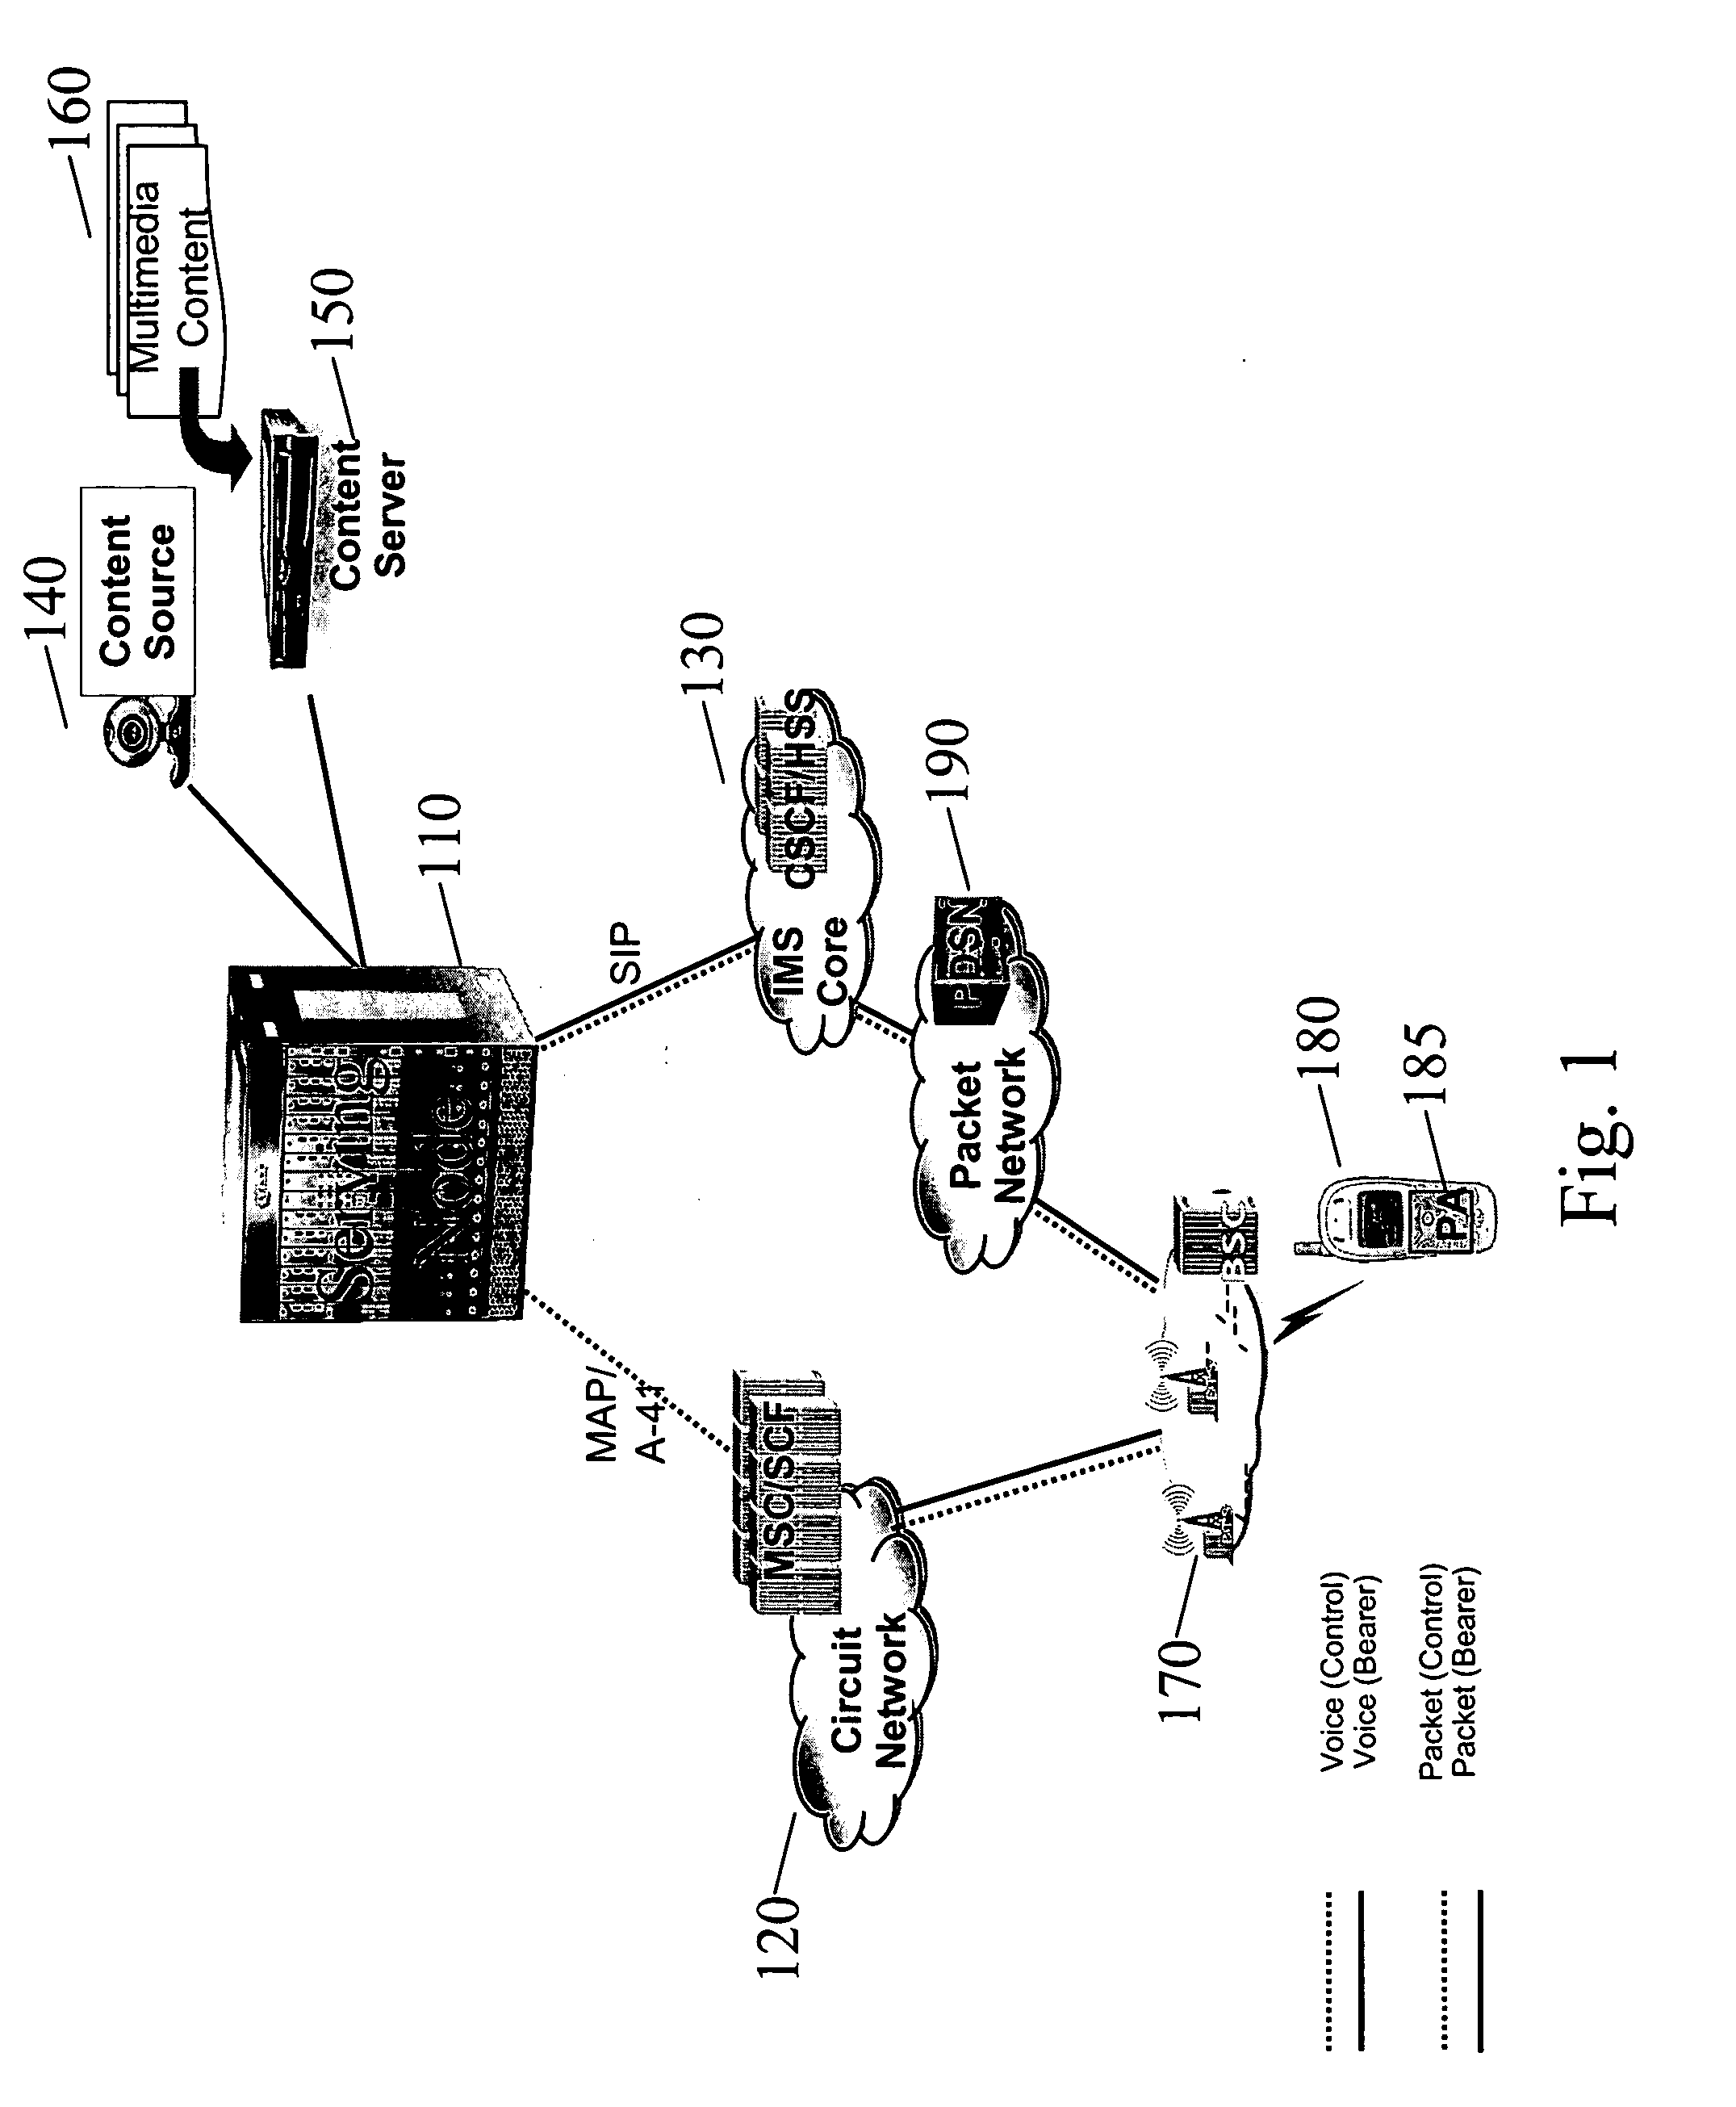 System and method for enabling combinational services in wireless networks by using a service delivery platform